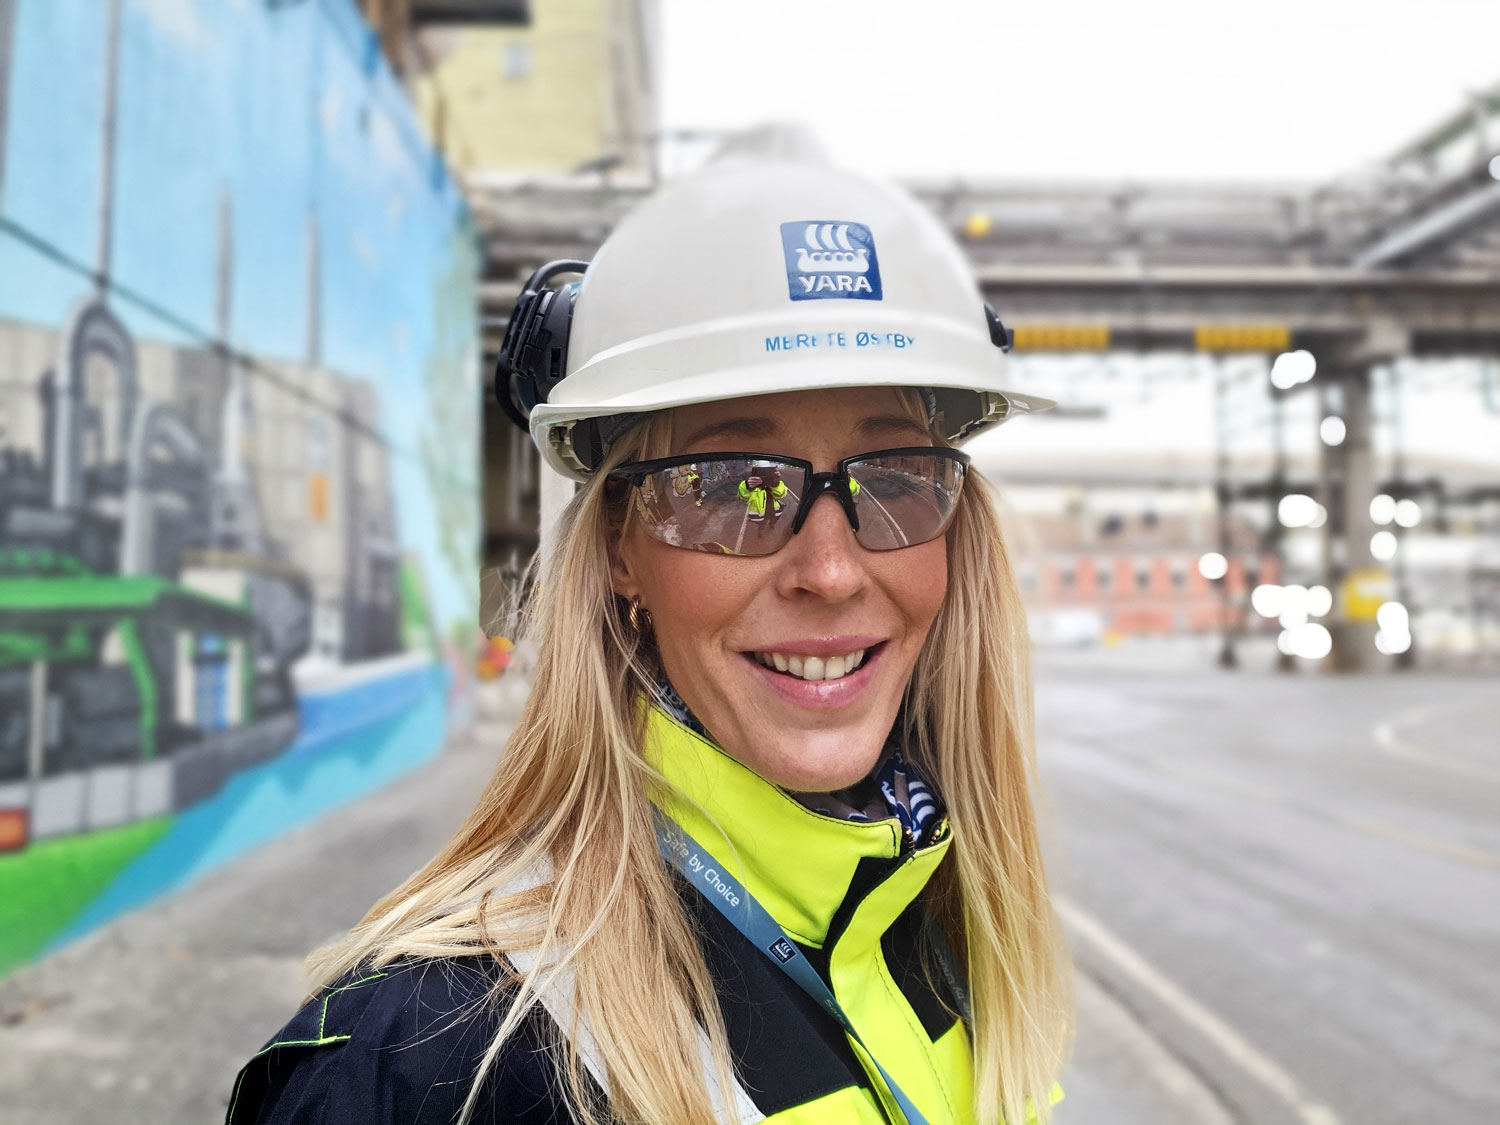 portrait of woman, posing, white helmet, yellow and blue jacket, long blond hair, goggles. She is standing in a street in an industrial park. Decorated concrete wall behind her.